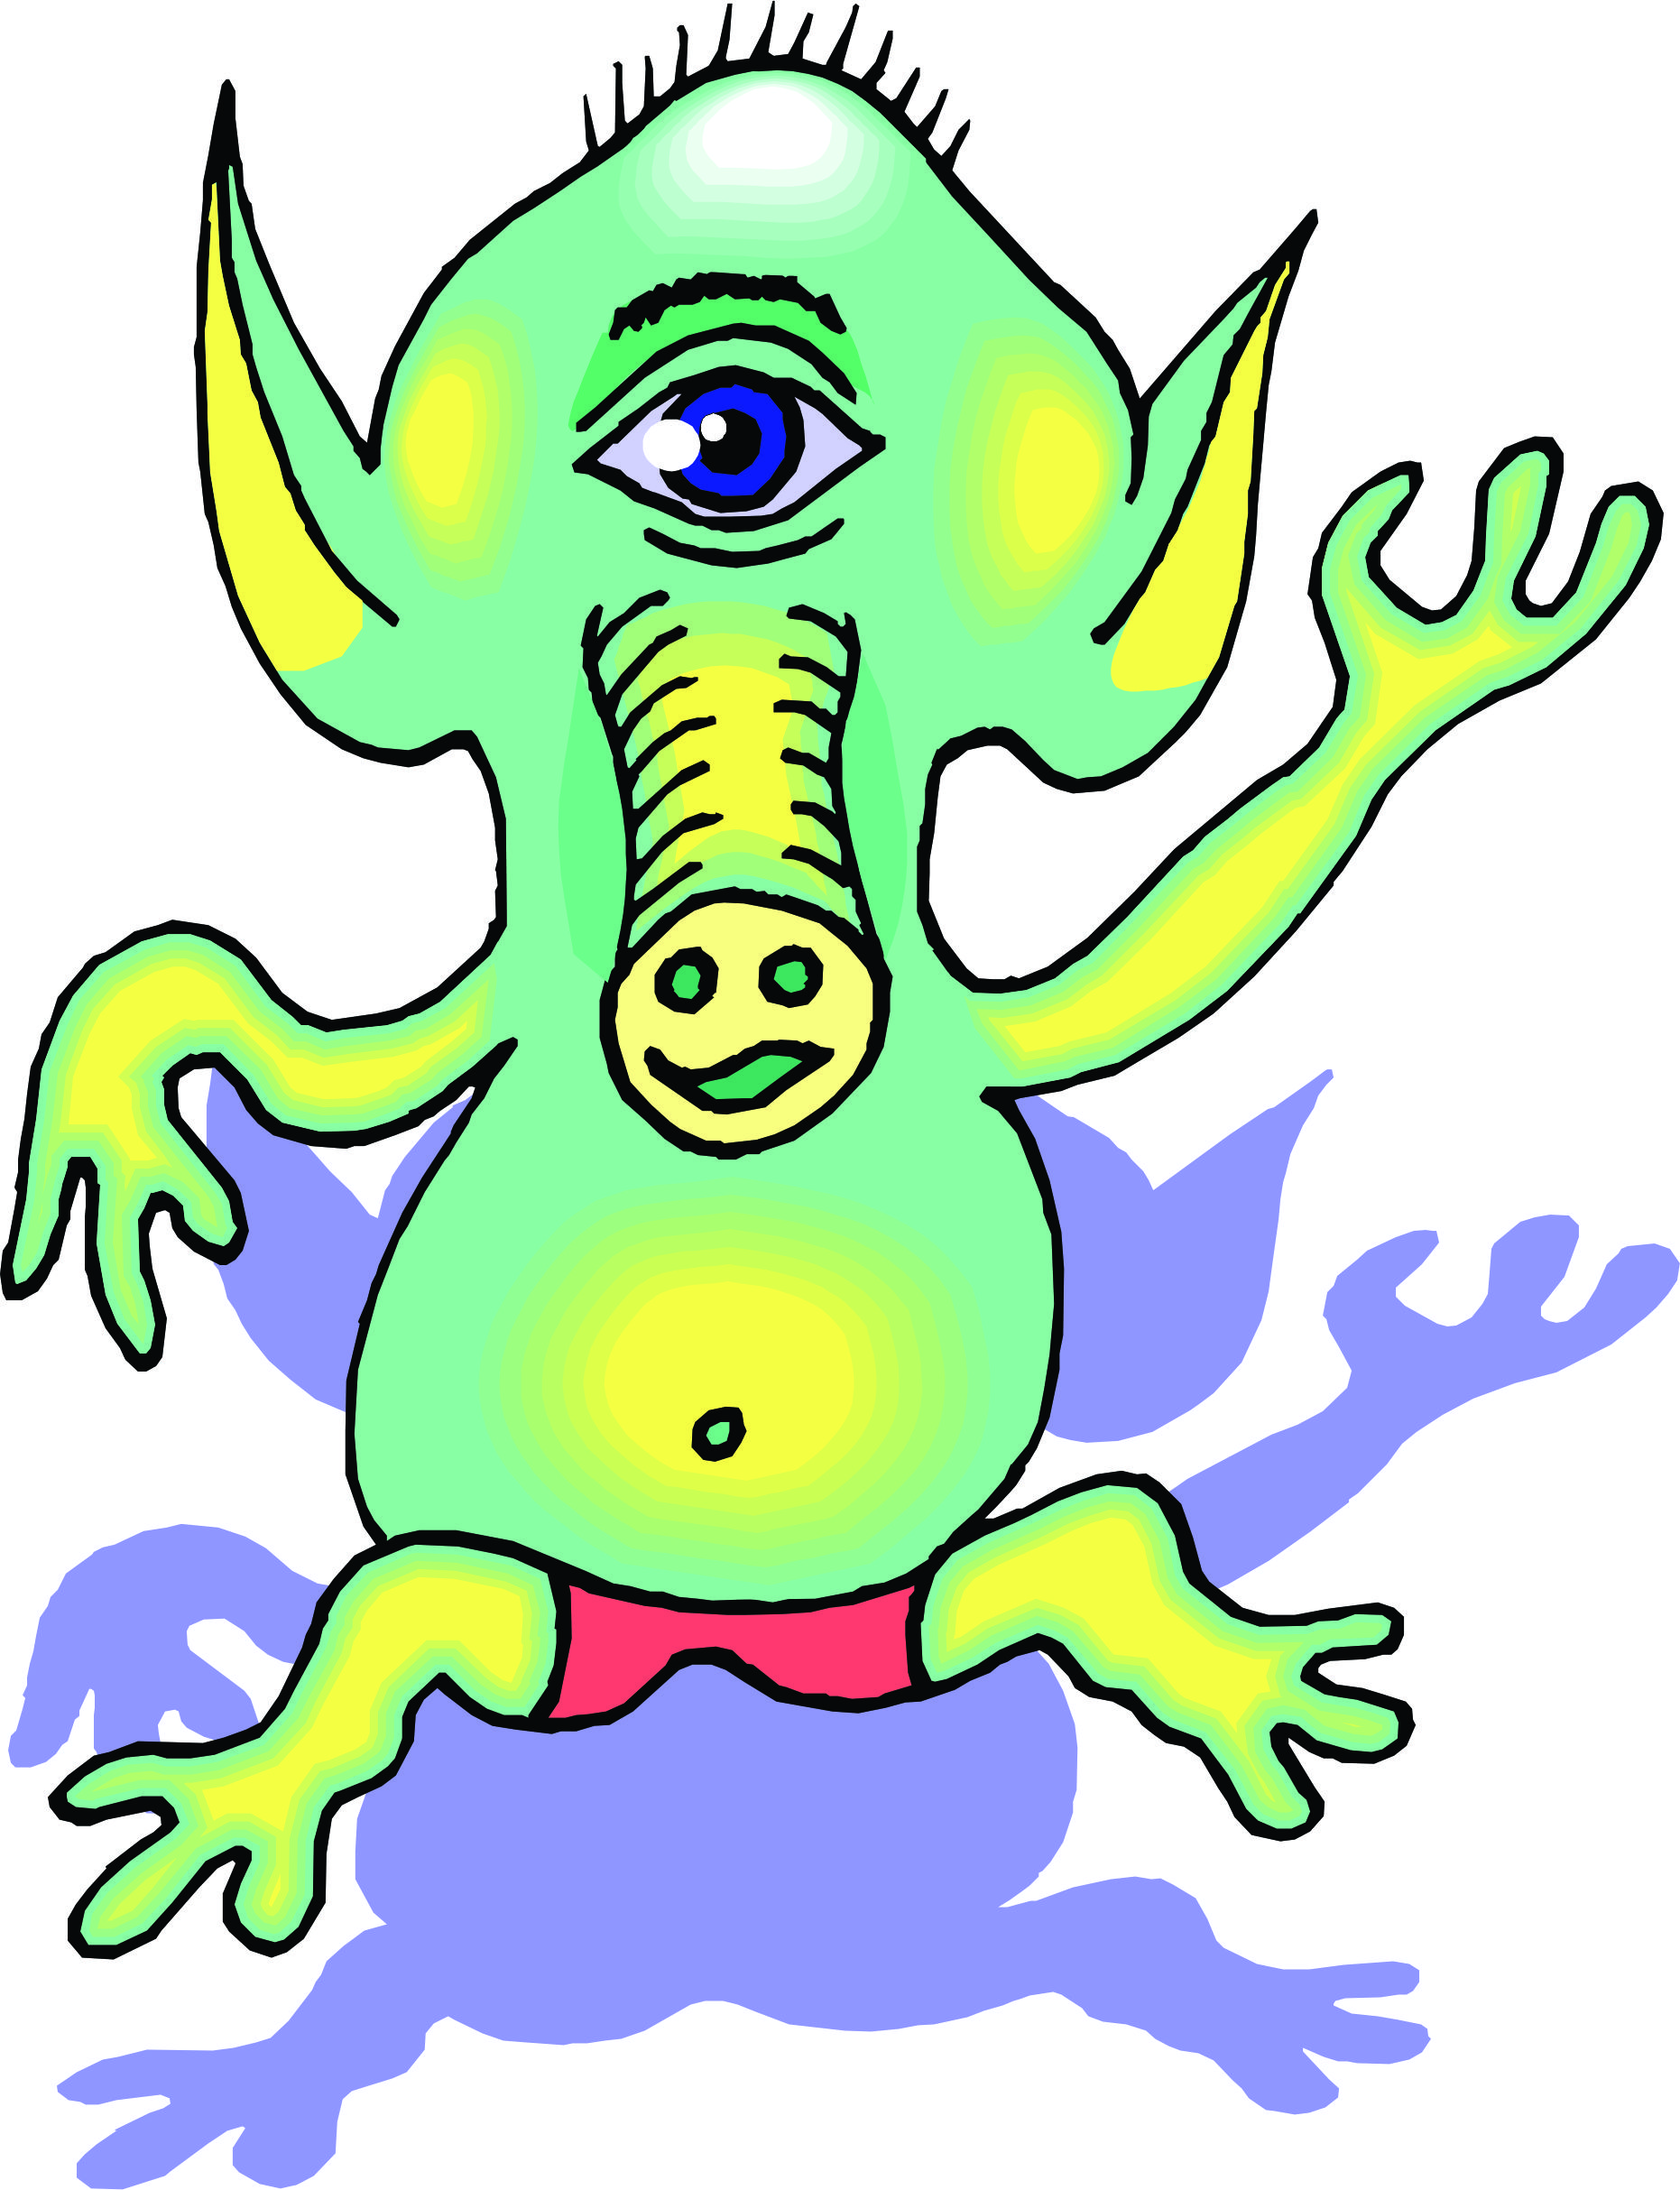 Images For > Cartoon Alien Images